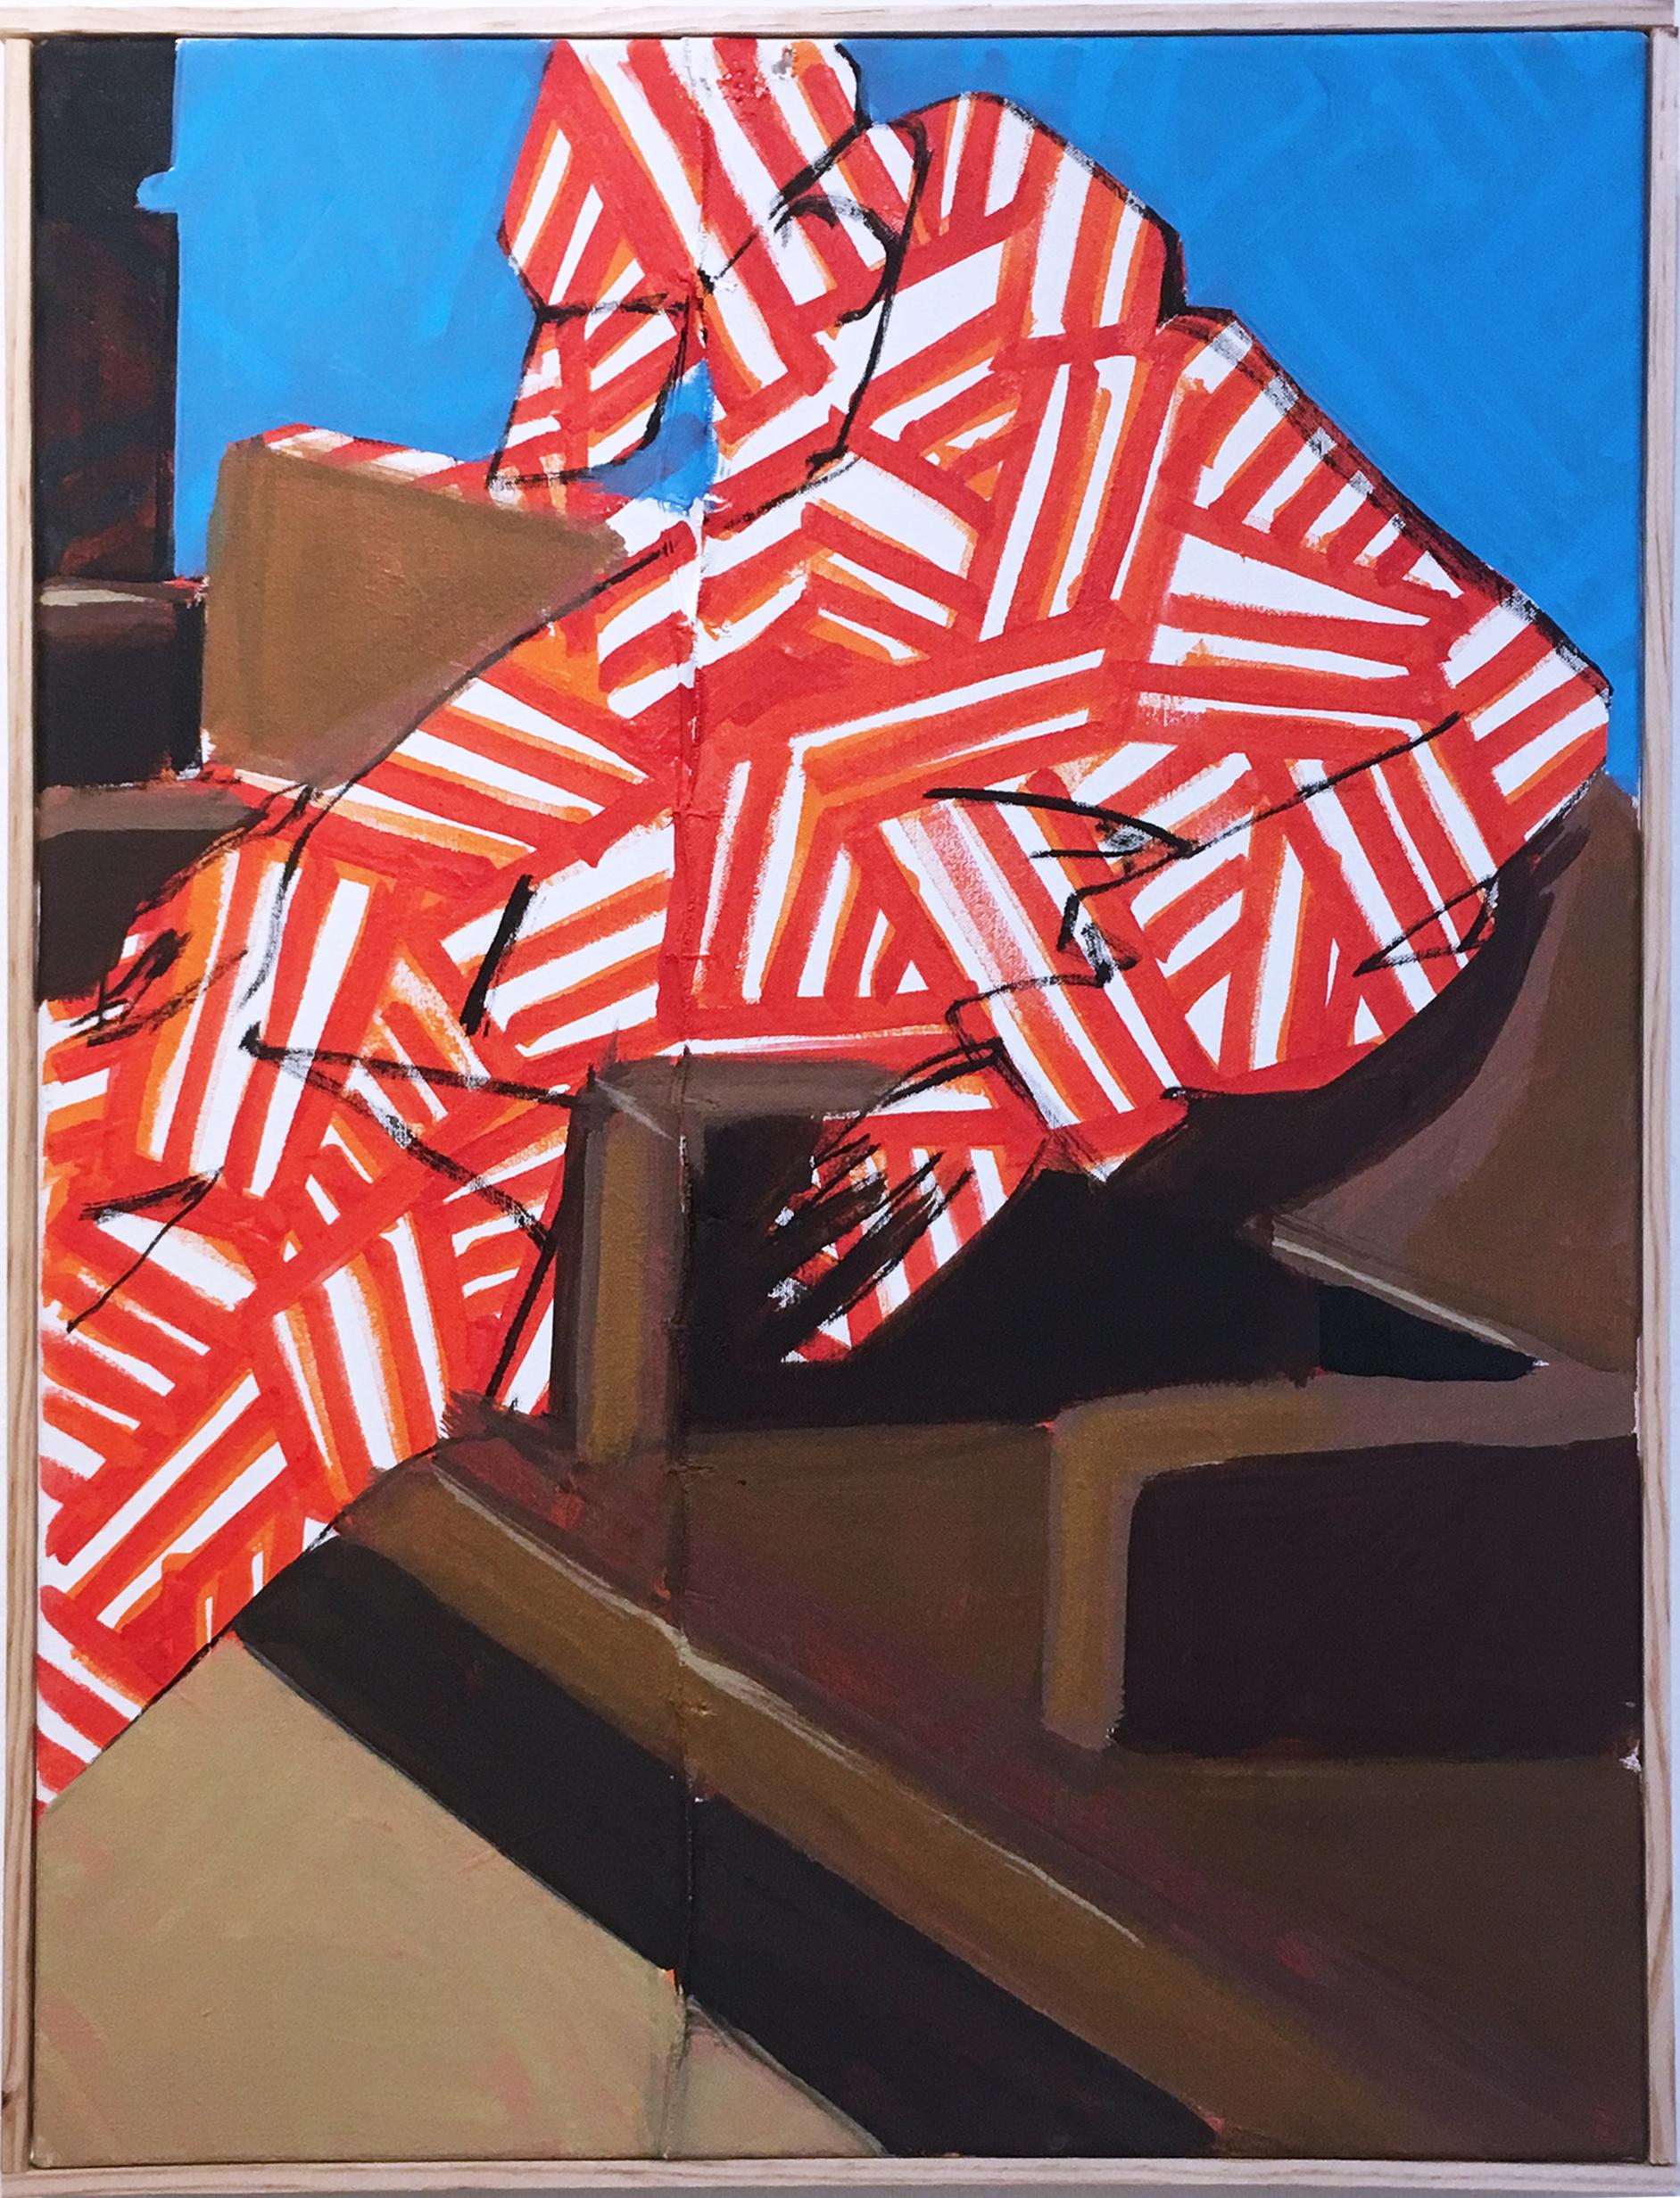 BlusterOne Portrait Painting - Now by street artist BLUSTERONE, figurative subway commuter with bold pattern